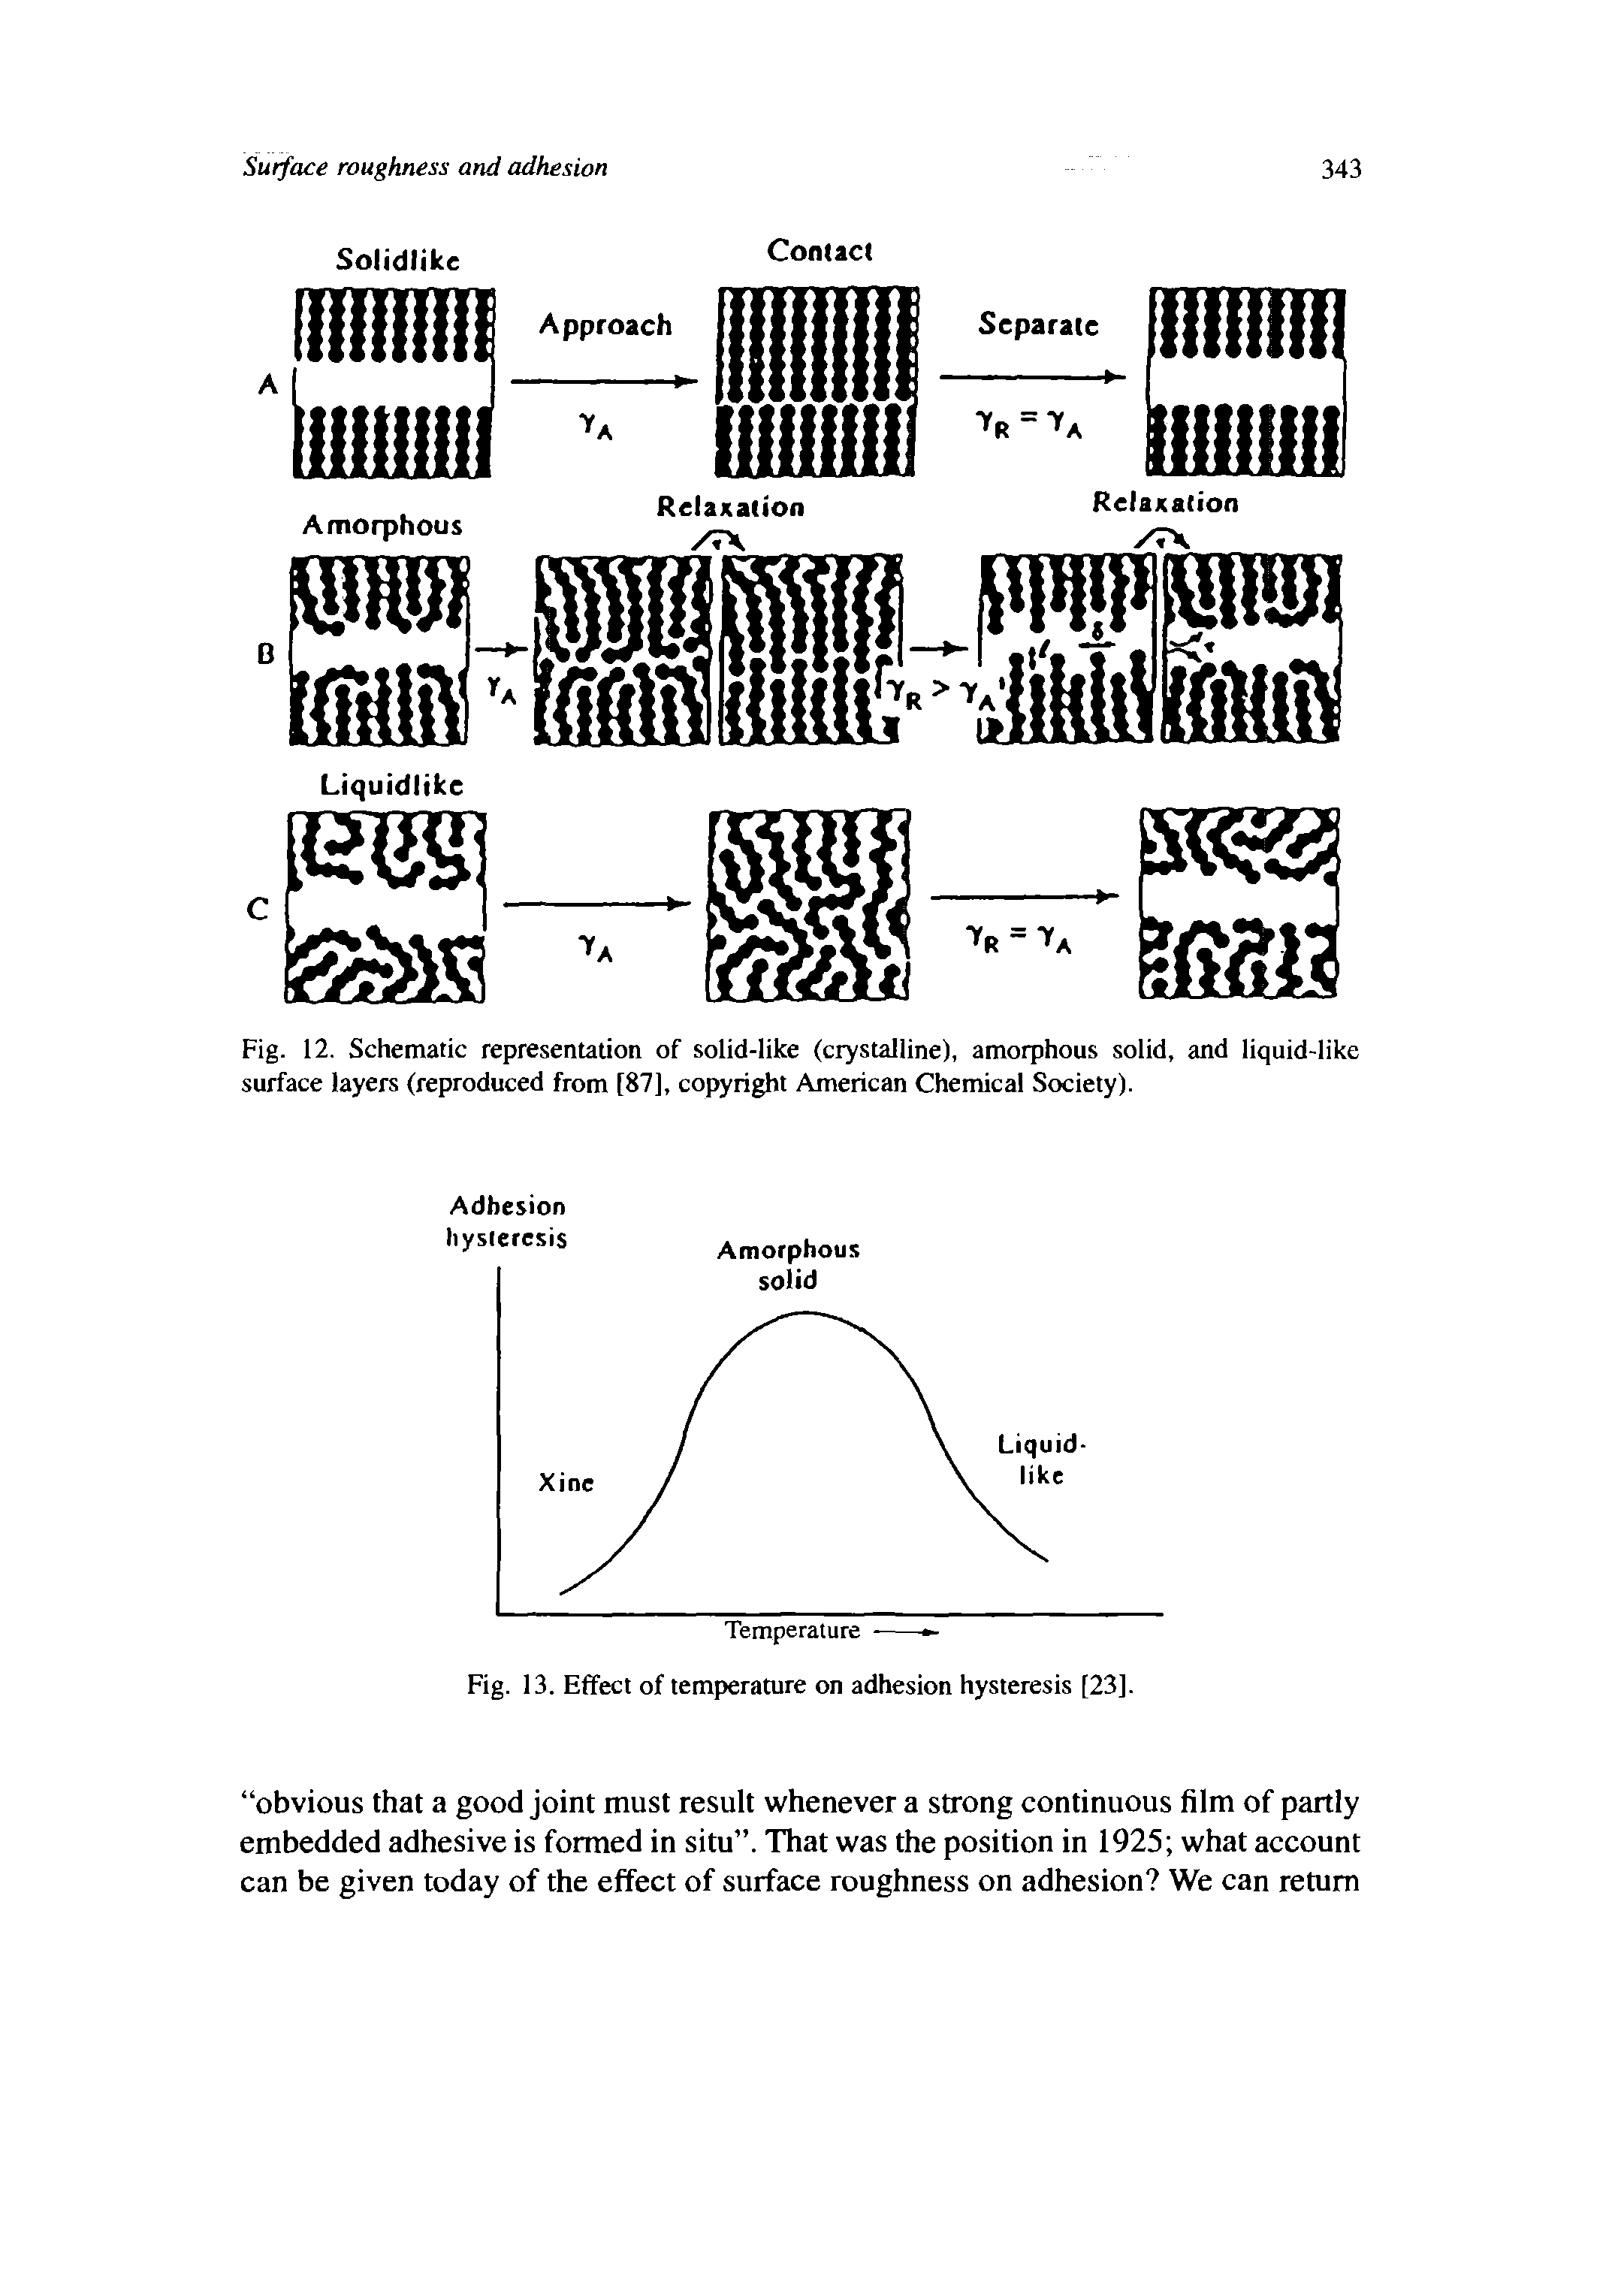 Fig. 12. Schematic representation of solid-like (crystalline), amorphous solid, and liquid-like surface layers (reproduced from [87], copyright American Chemical Society).